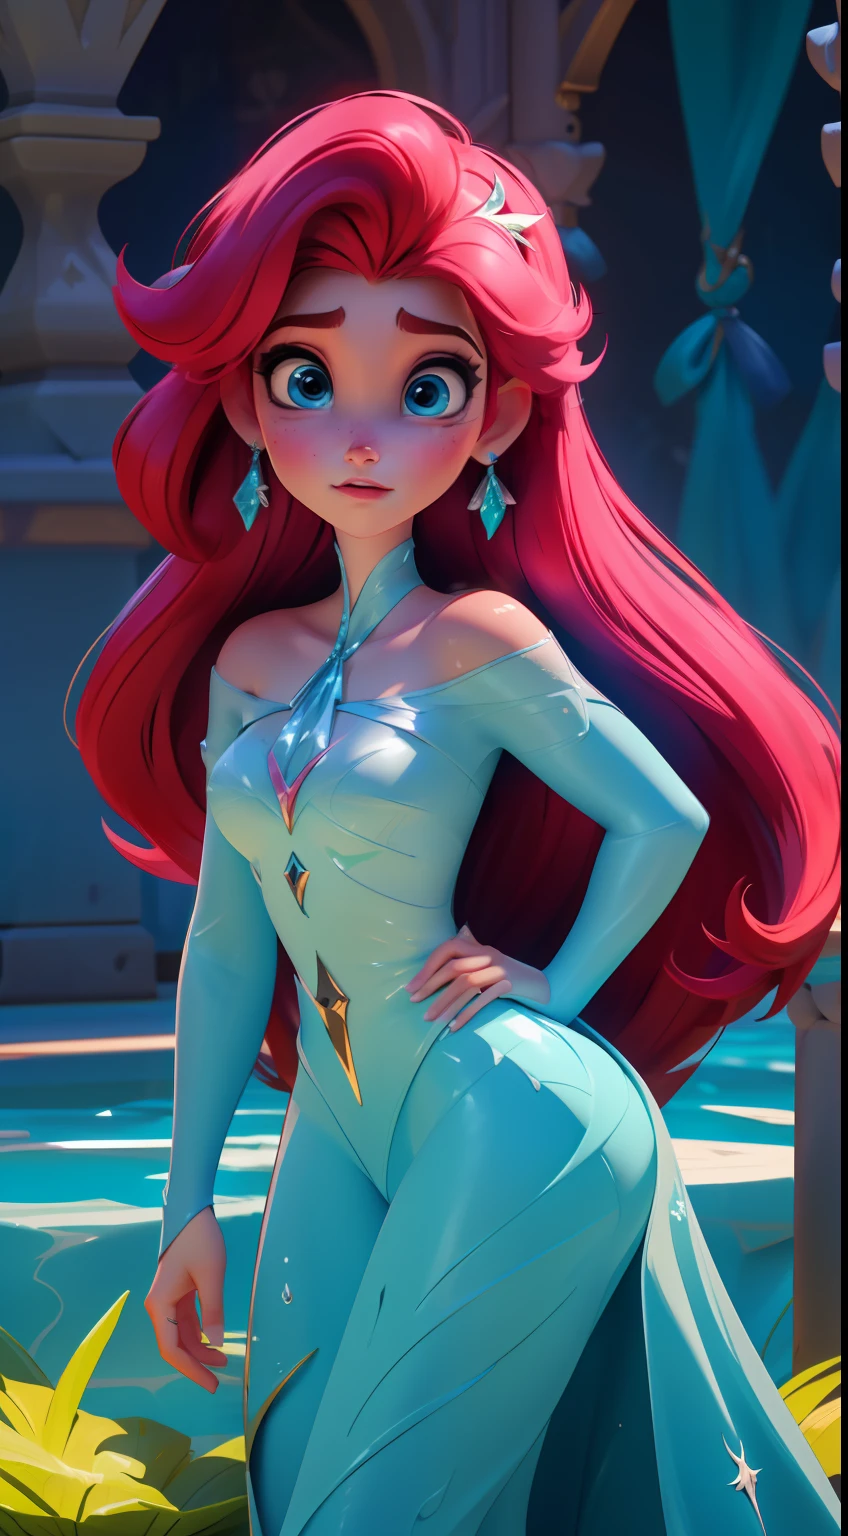 Elsa-Ariel Fusion, Merging models, melting, Ariel&#39;s clothes, 1girl, Beautiful, character, Woman, female, beachfront, (master part:1.2), (best qualityer:1.2), (standing alone:1.2), ((struggling pose)), ((field of battle)), cinemactic, perfects eyes, perfect  skin, perfect lighting, sorrido, Lumiere, Farbe, texturized skin, detail, Beauthfull, wonder wonder wonder wonder wonder wonder wonder wonder wonder wonder wonder wonder wonder wonder wonder wonder wonder wonder wonder wonder wonder wonder wonder wonder wonder wonder wonder wonder wonder wonder wonder wonder, ultra detali, face perfect